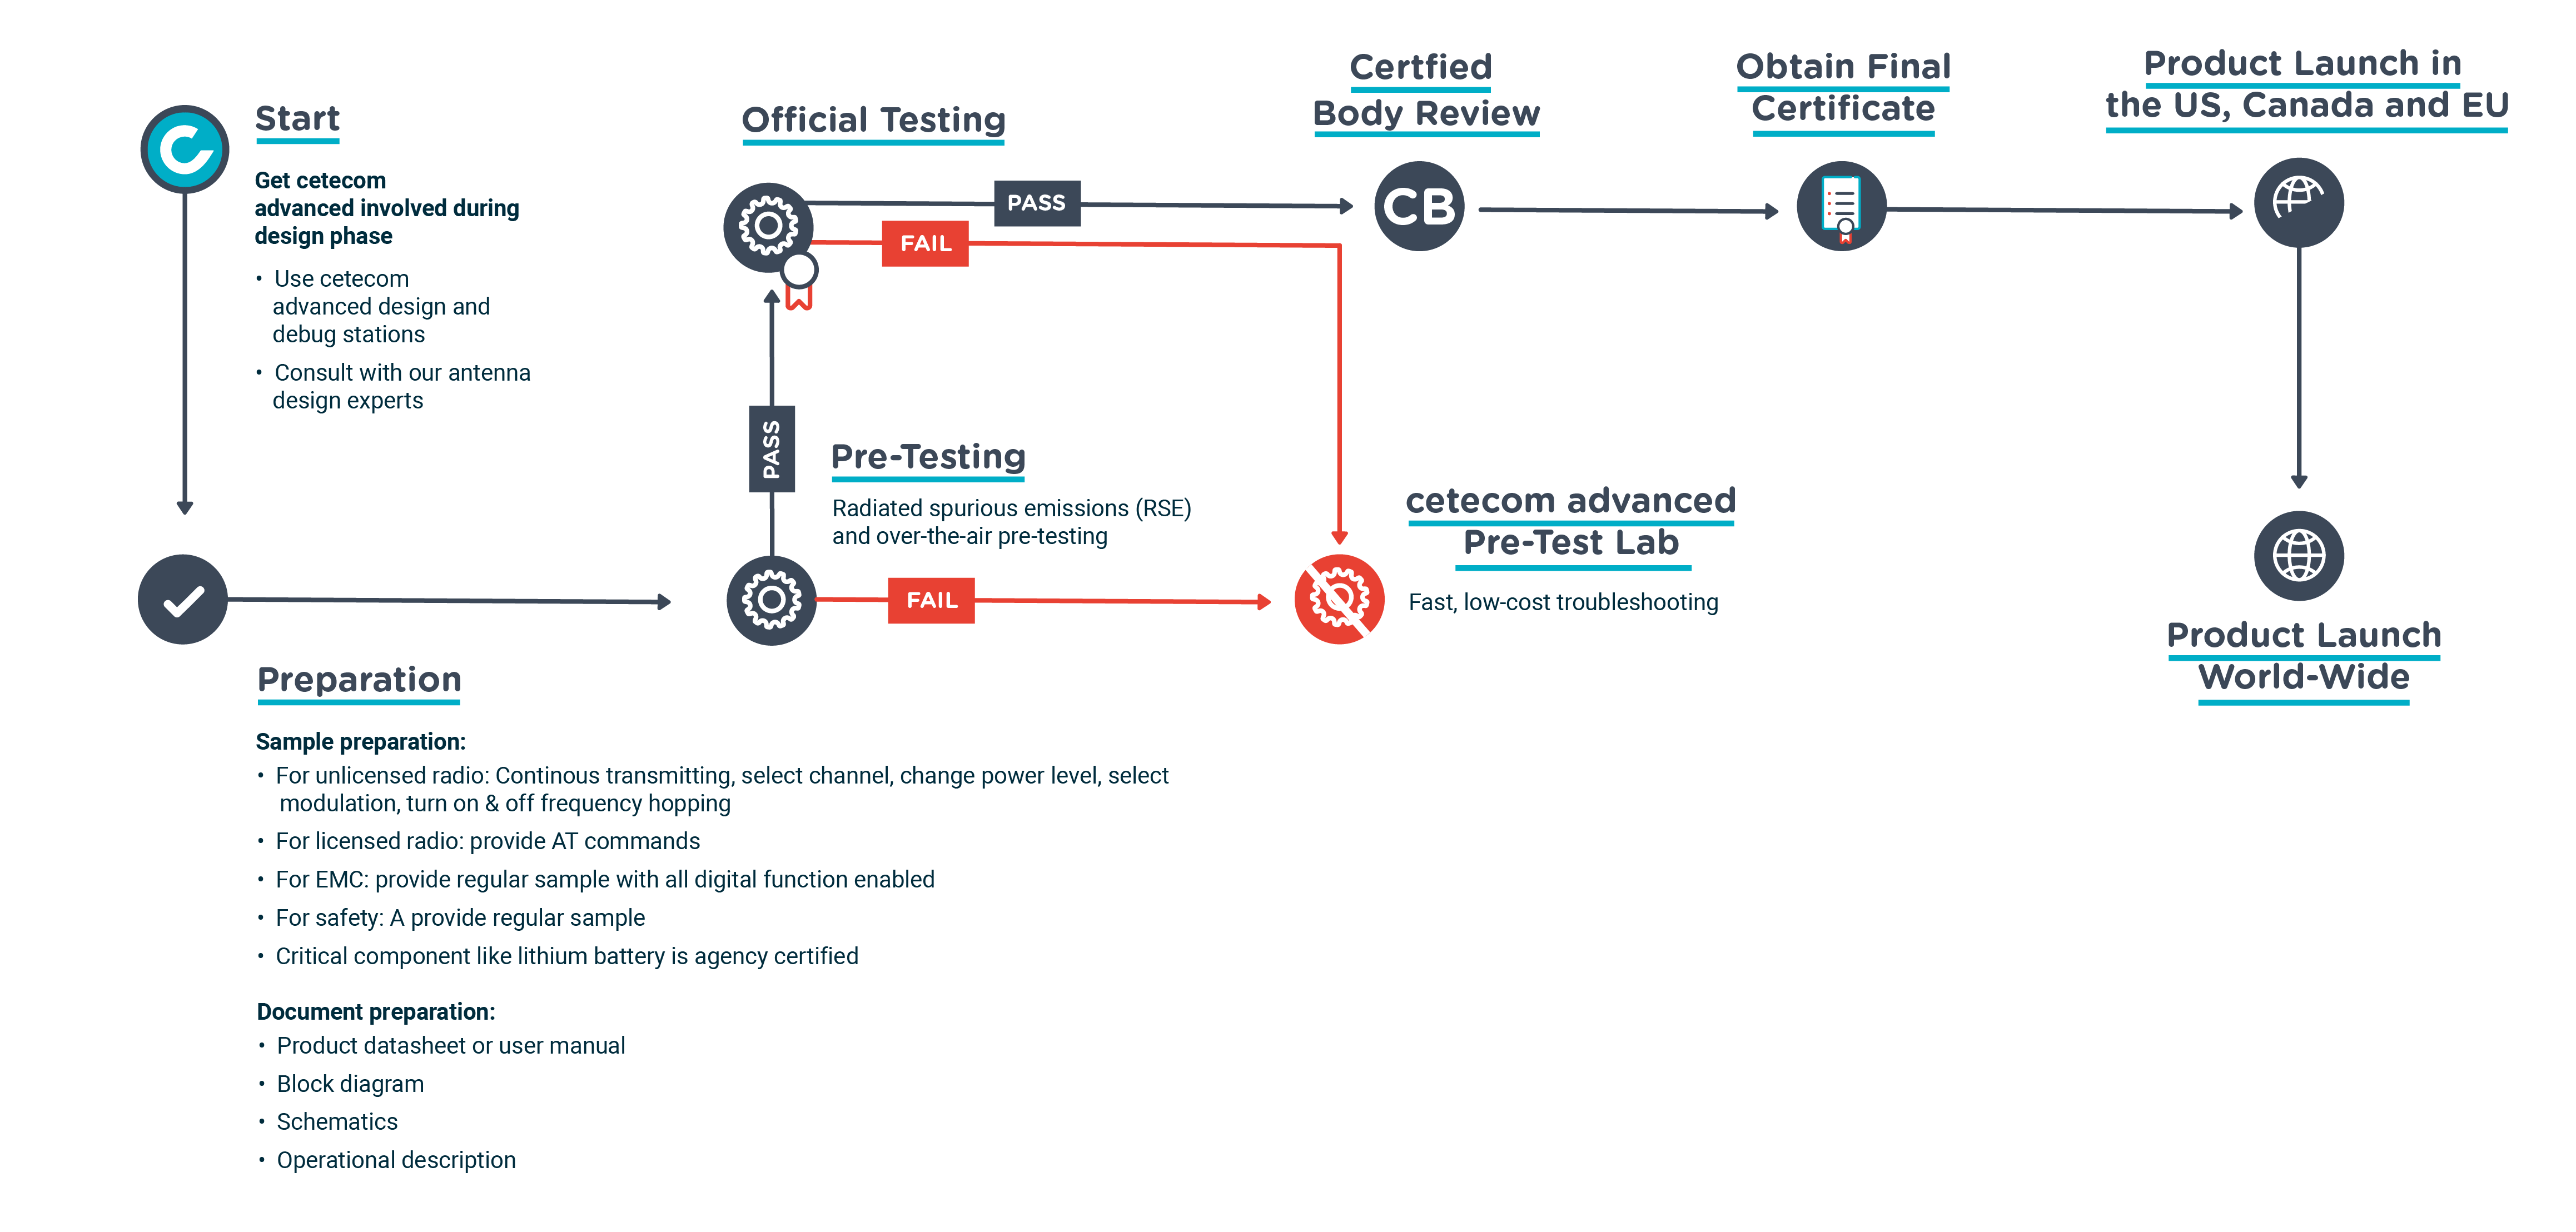 A flowchart showing the complete process for product development and certification with the help of cetecom advanced: Starting with the involvement of cetecom advanced in the design phase, moving on to sample preparation, then to pre-testing, official testing, certified body review, obtaining the final certificate, product launch in the USA, Canada and the EU and finally product launch worldwide.